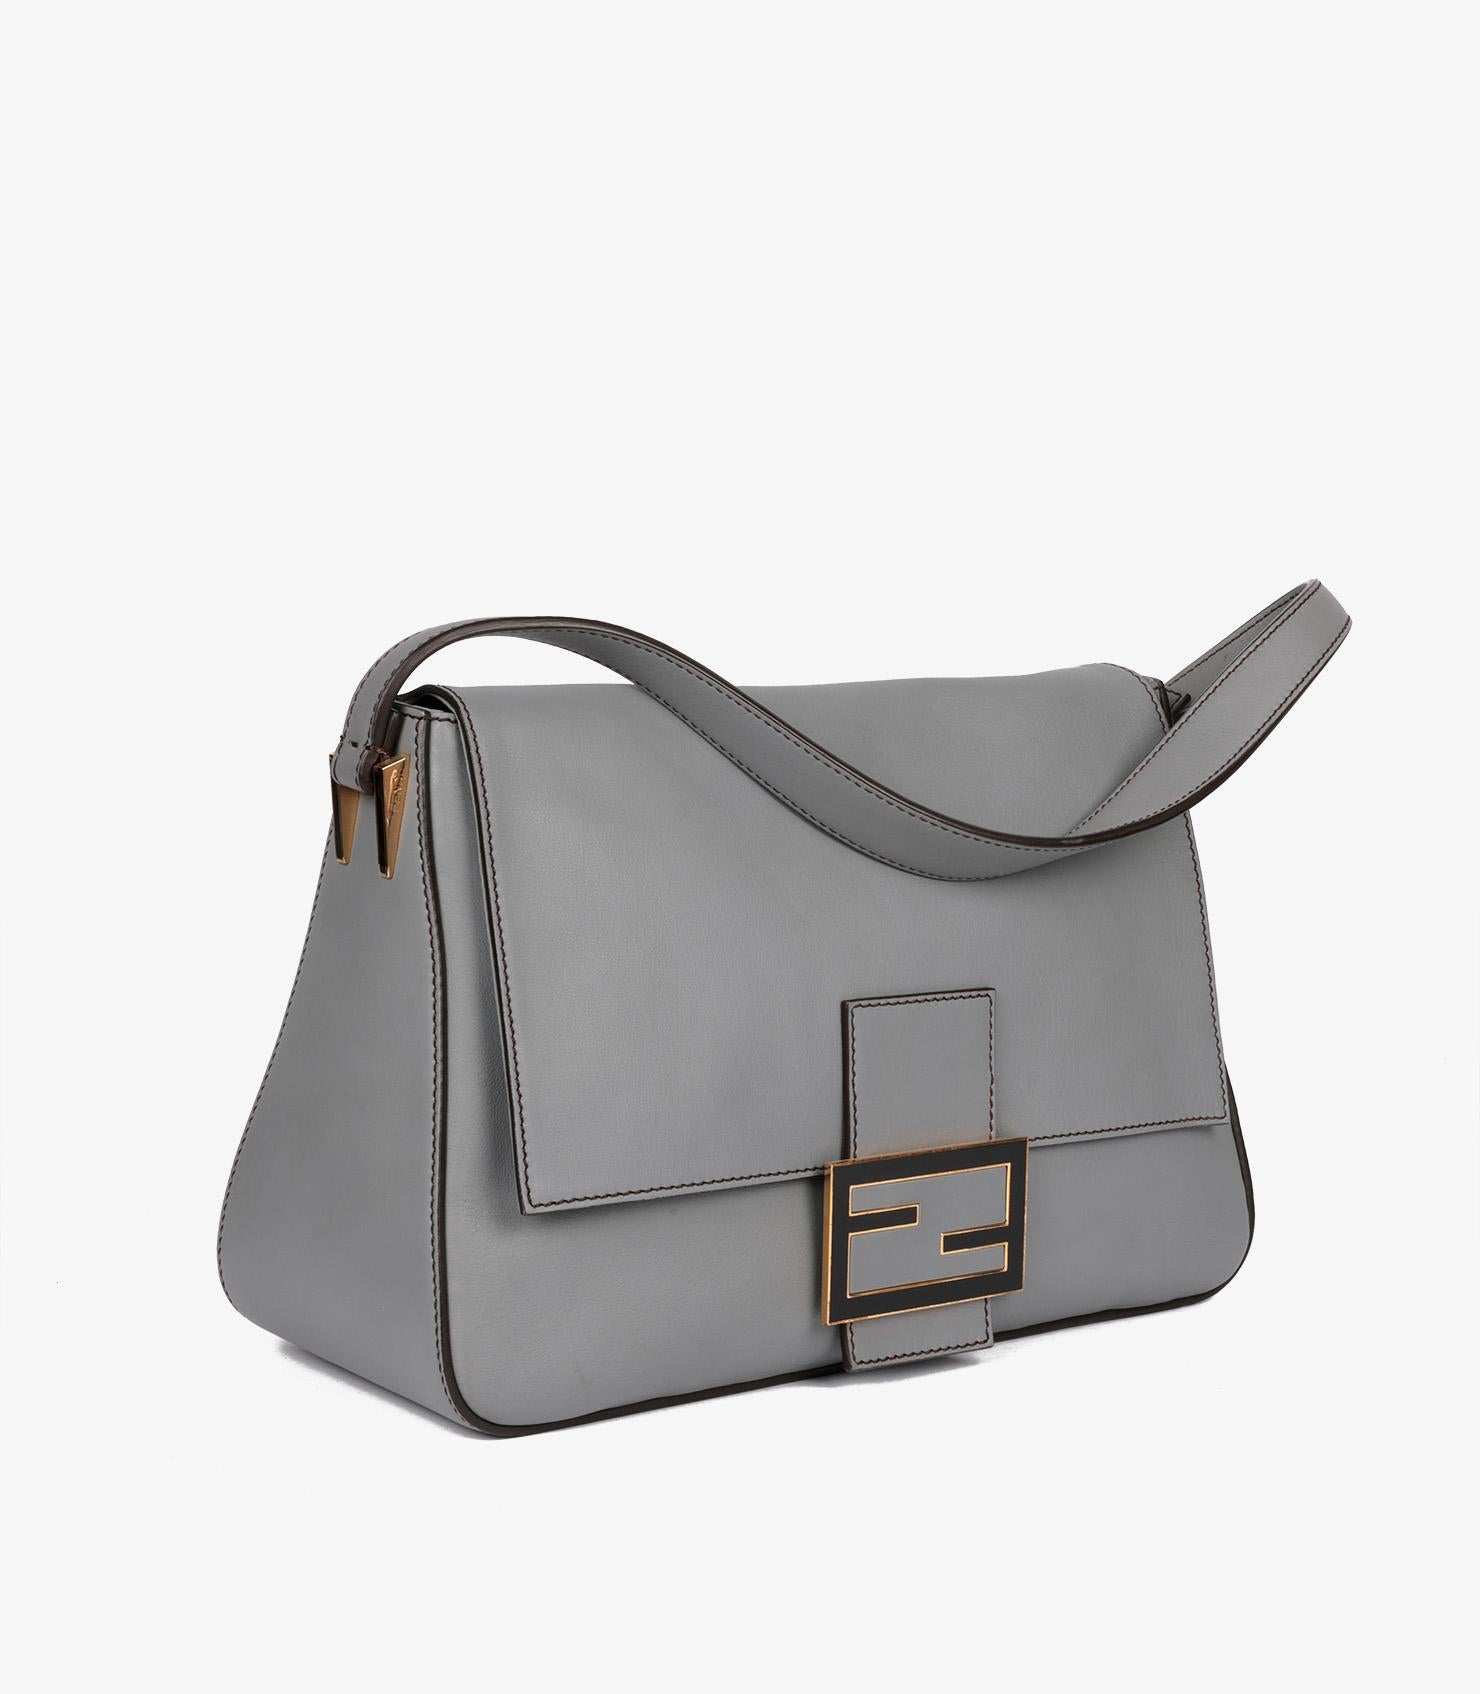 Fendi Grey Smooth Calfskin Leather Mama Baguette

Brand- Fendi
Model- Mama Baguette
Product Type- Shoulder
Serial Number- 8B*****************
Accompanied By- Fendi Dust Bag
Colour- Grey
Hardware- Gold
Material(s)- Calfskin Leather

Height-